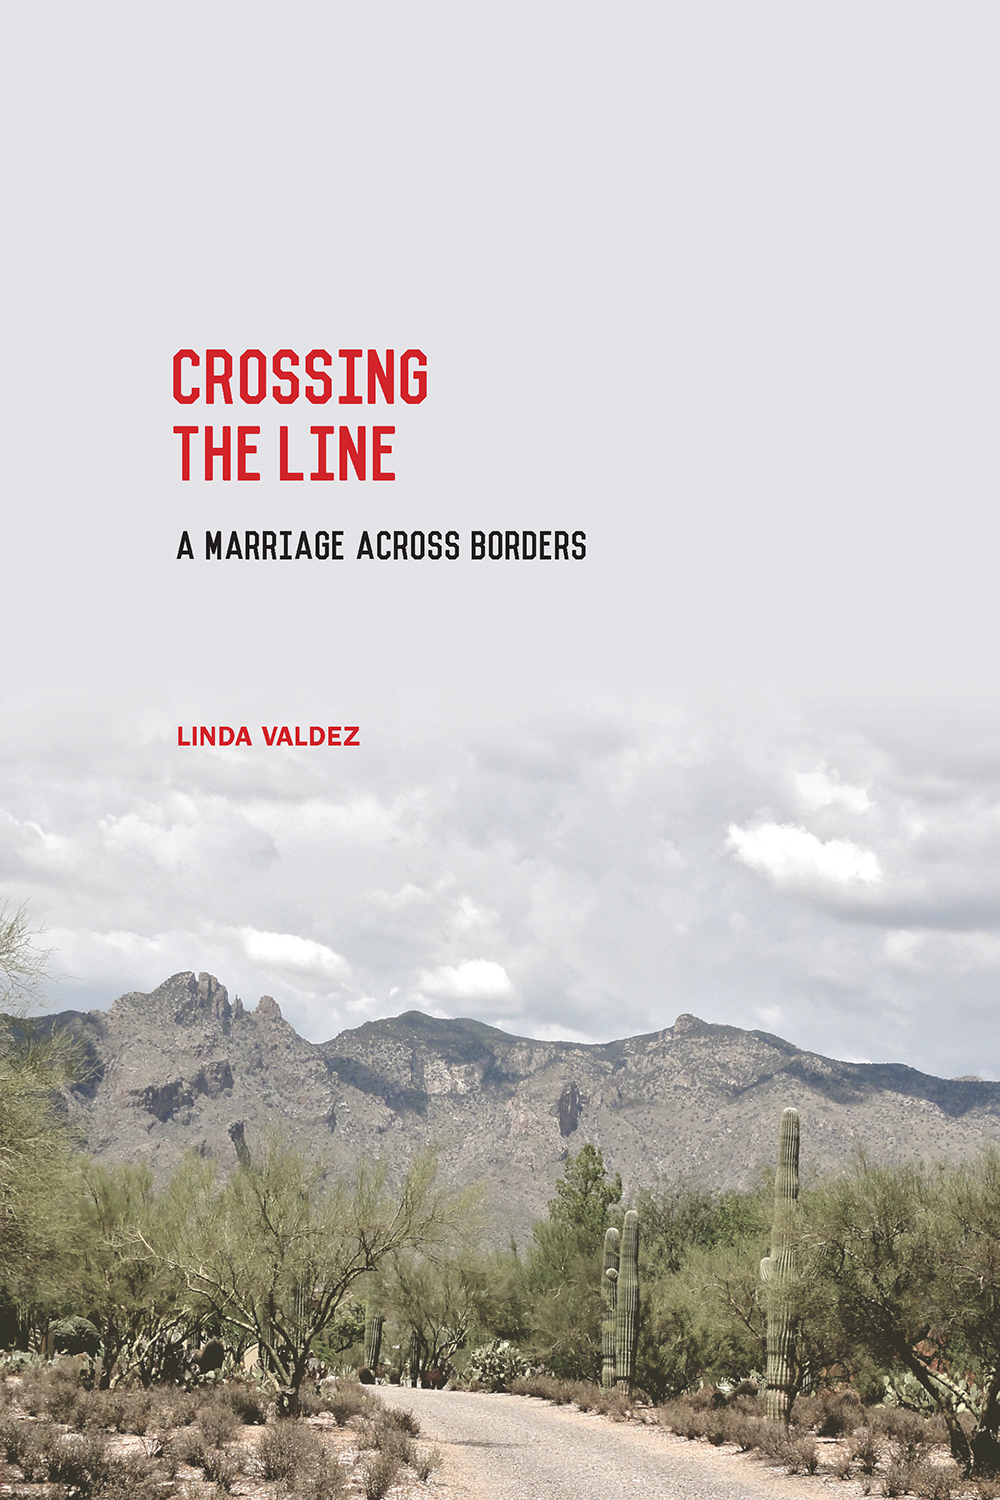 Crossing the Line: A Marriage across Borders by Linda Valdez